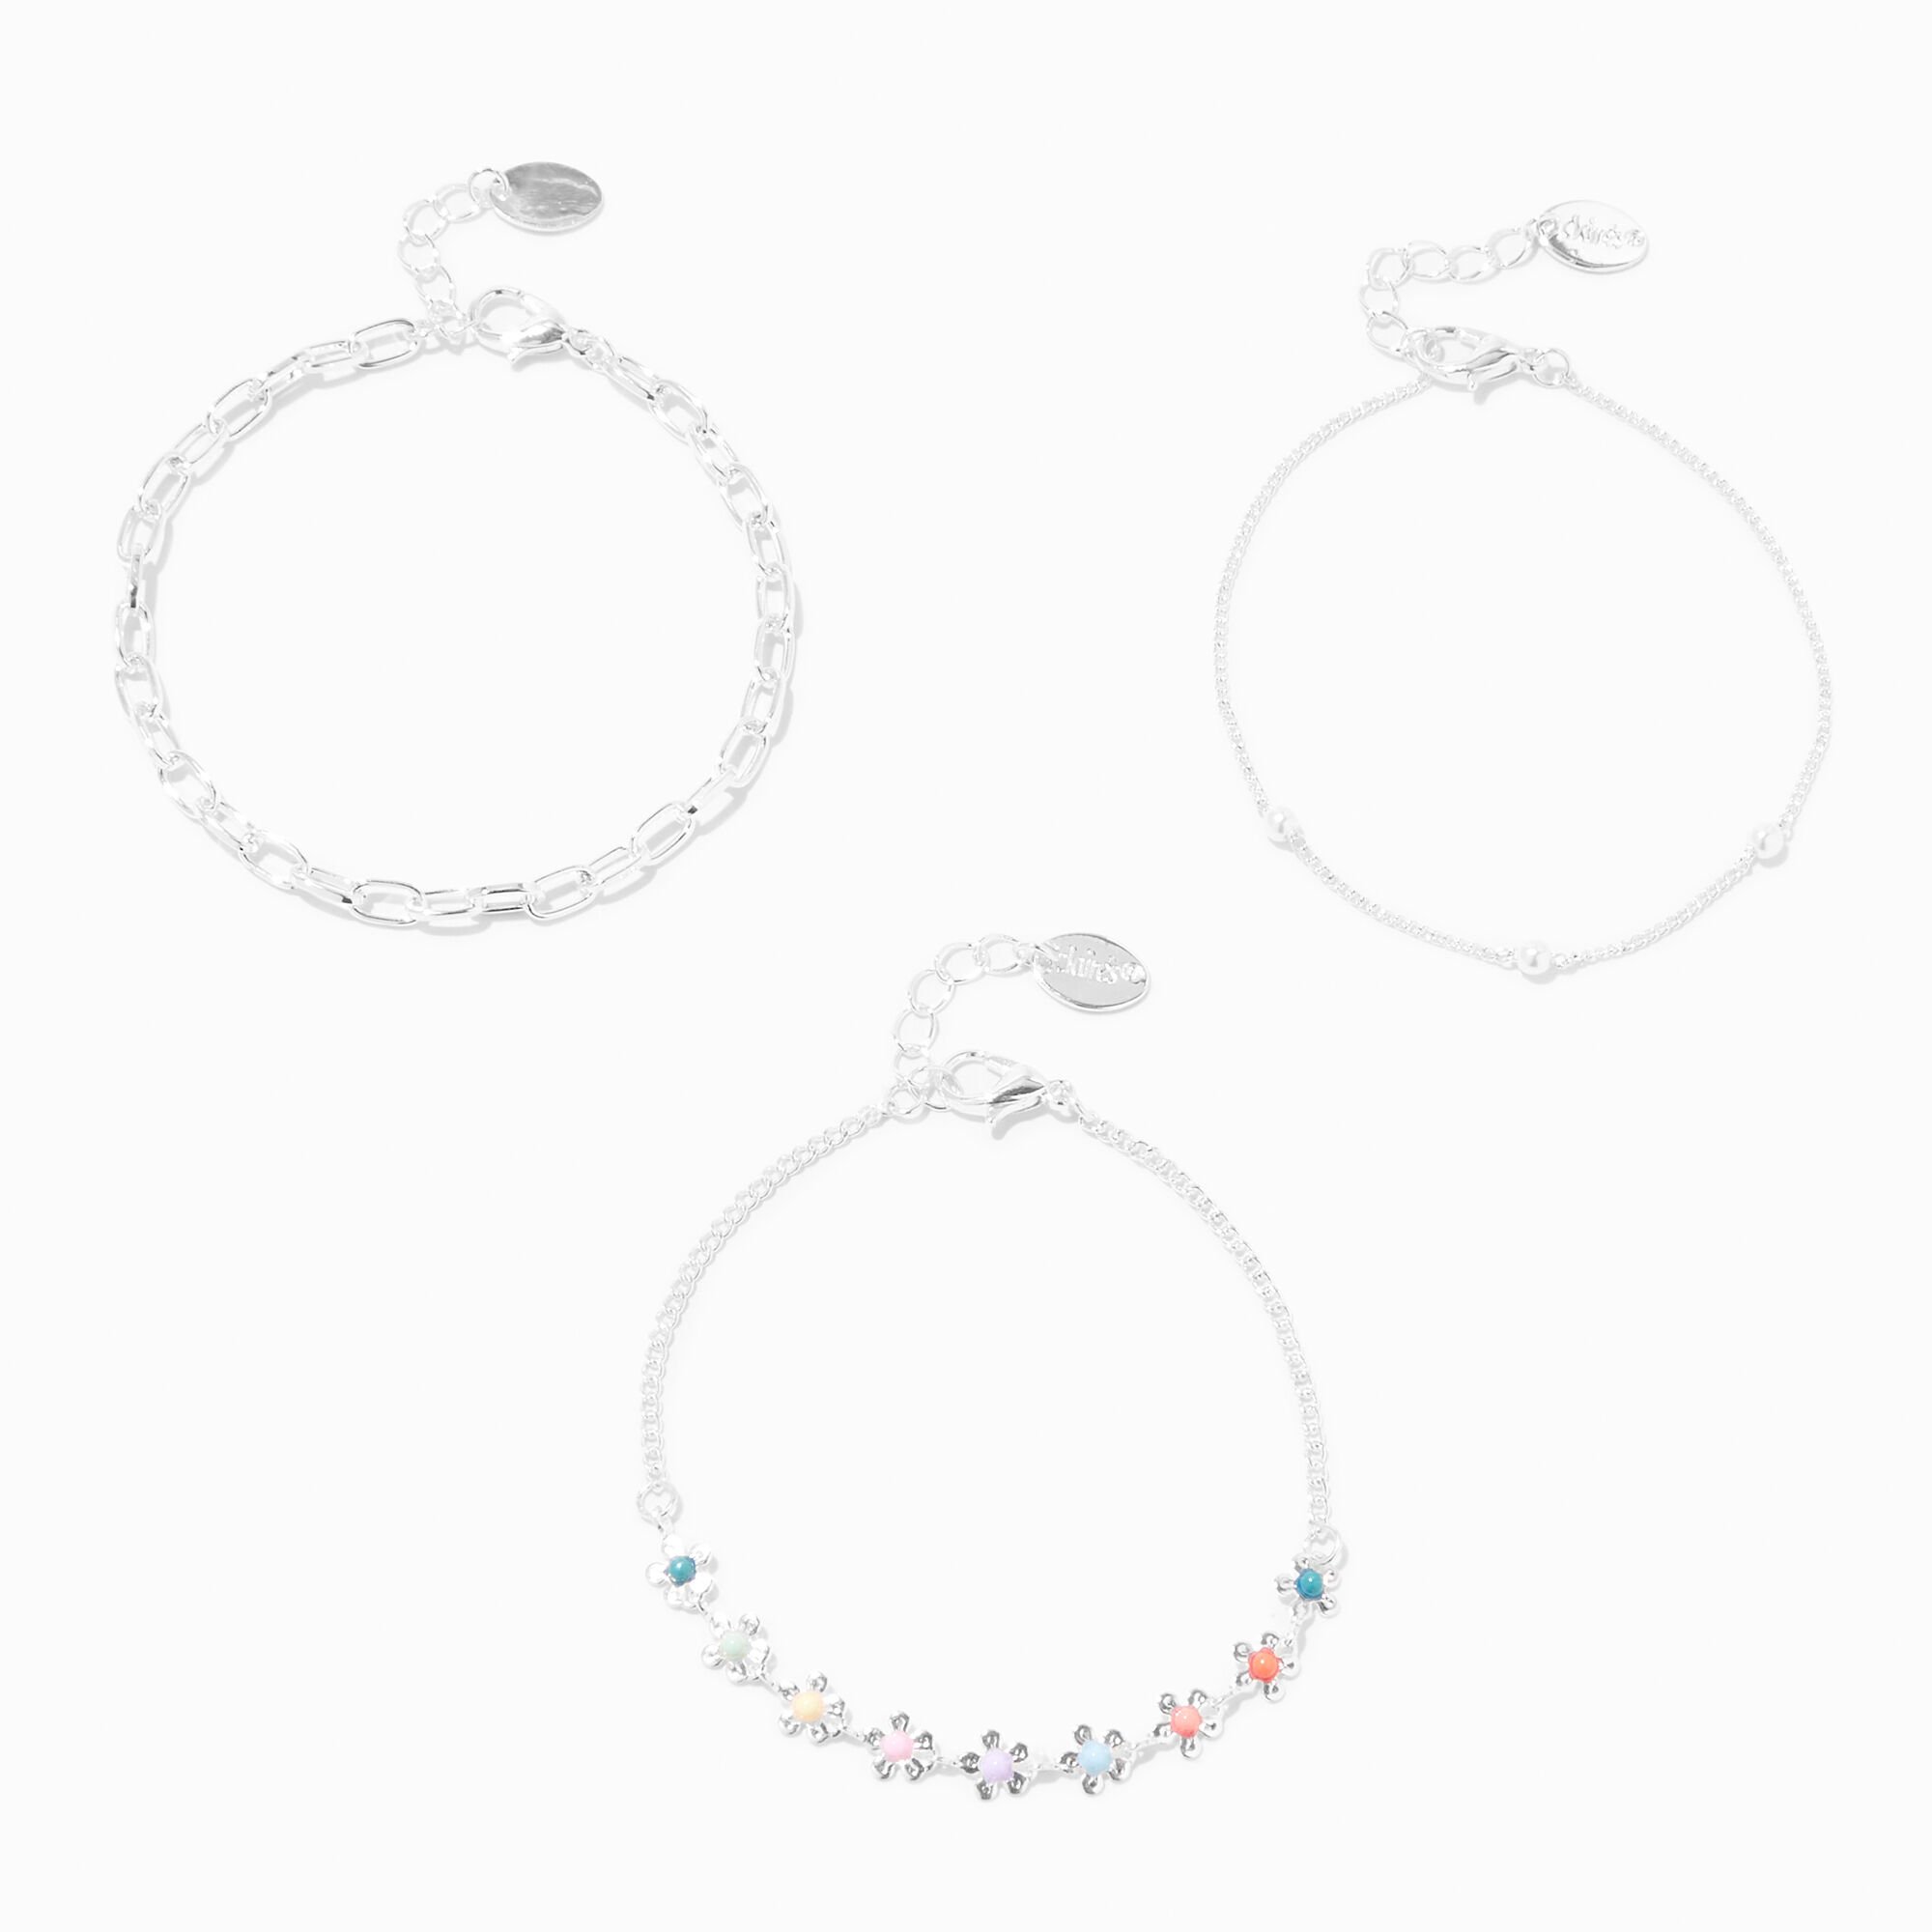 View Claires Tone Rainbow Daisy Chain Bracelets 3 Pack Silver information